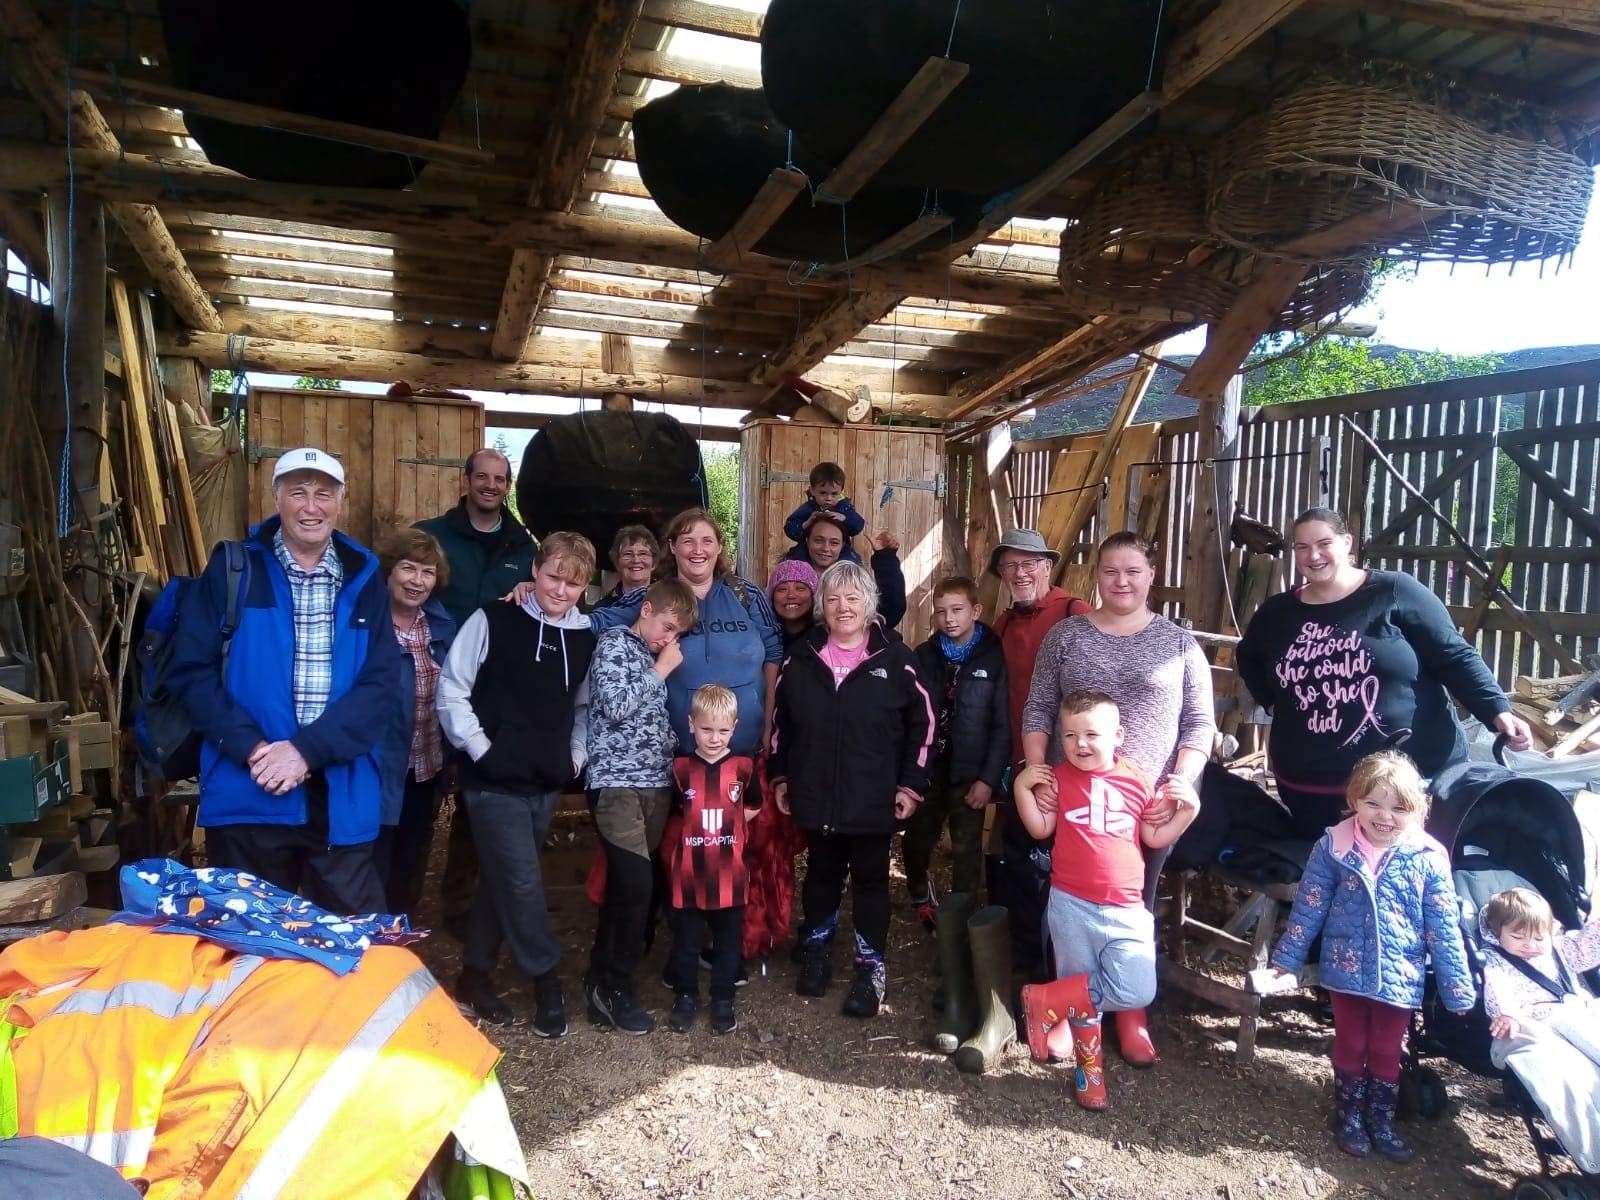 Hilton Family Support organised a trip to Abriachan Forestry Trust which was enjoyed by adults and children.